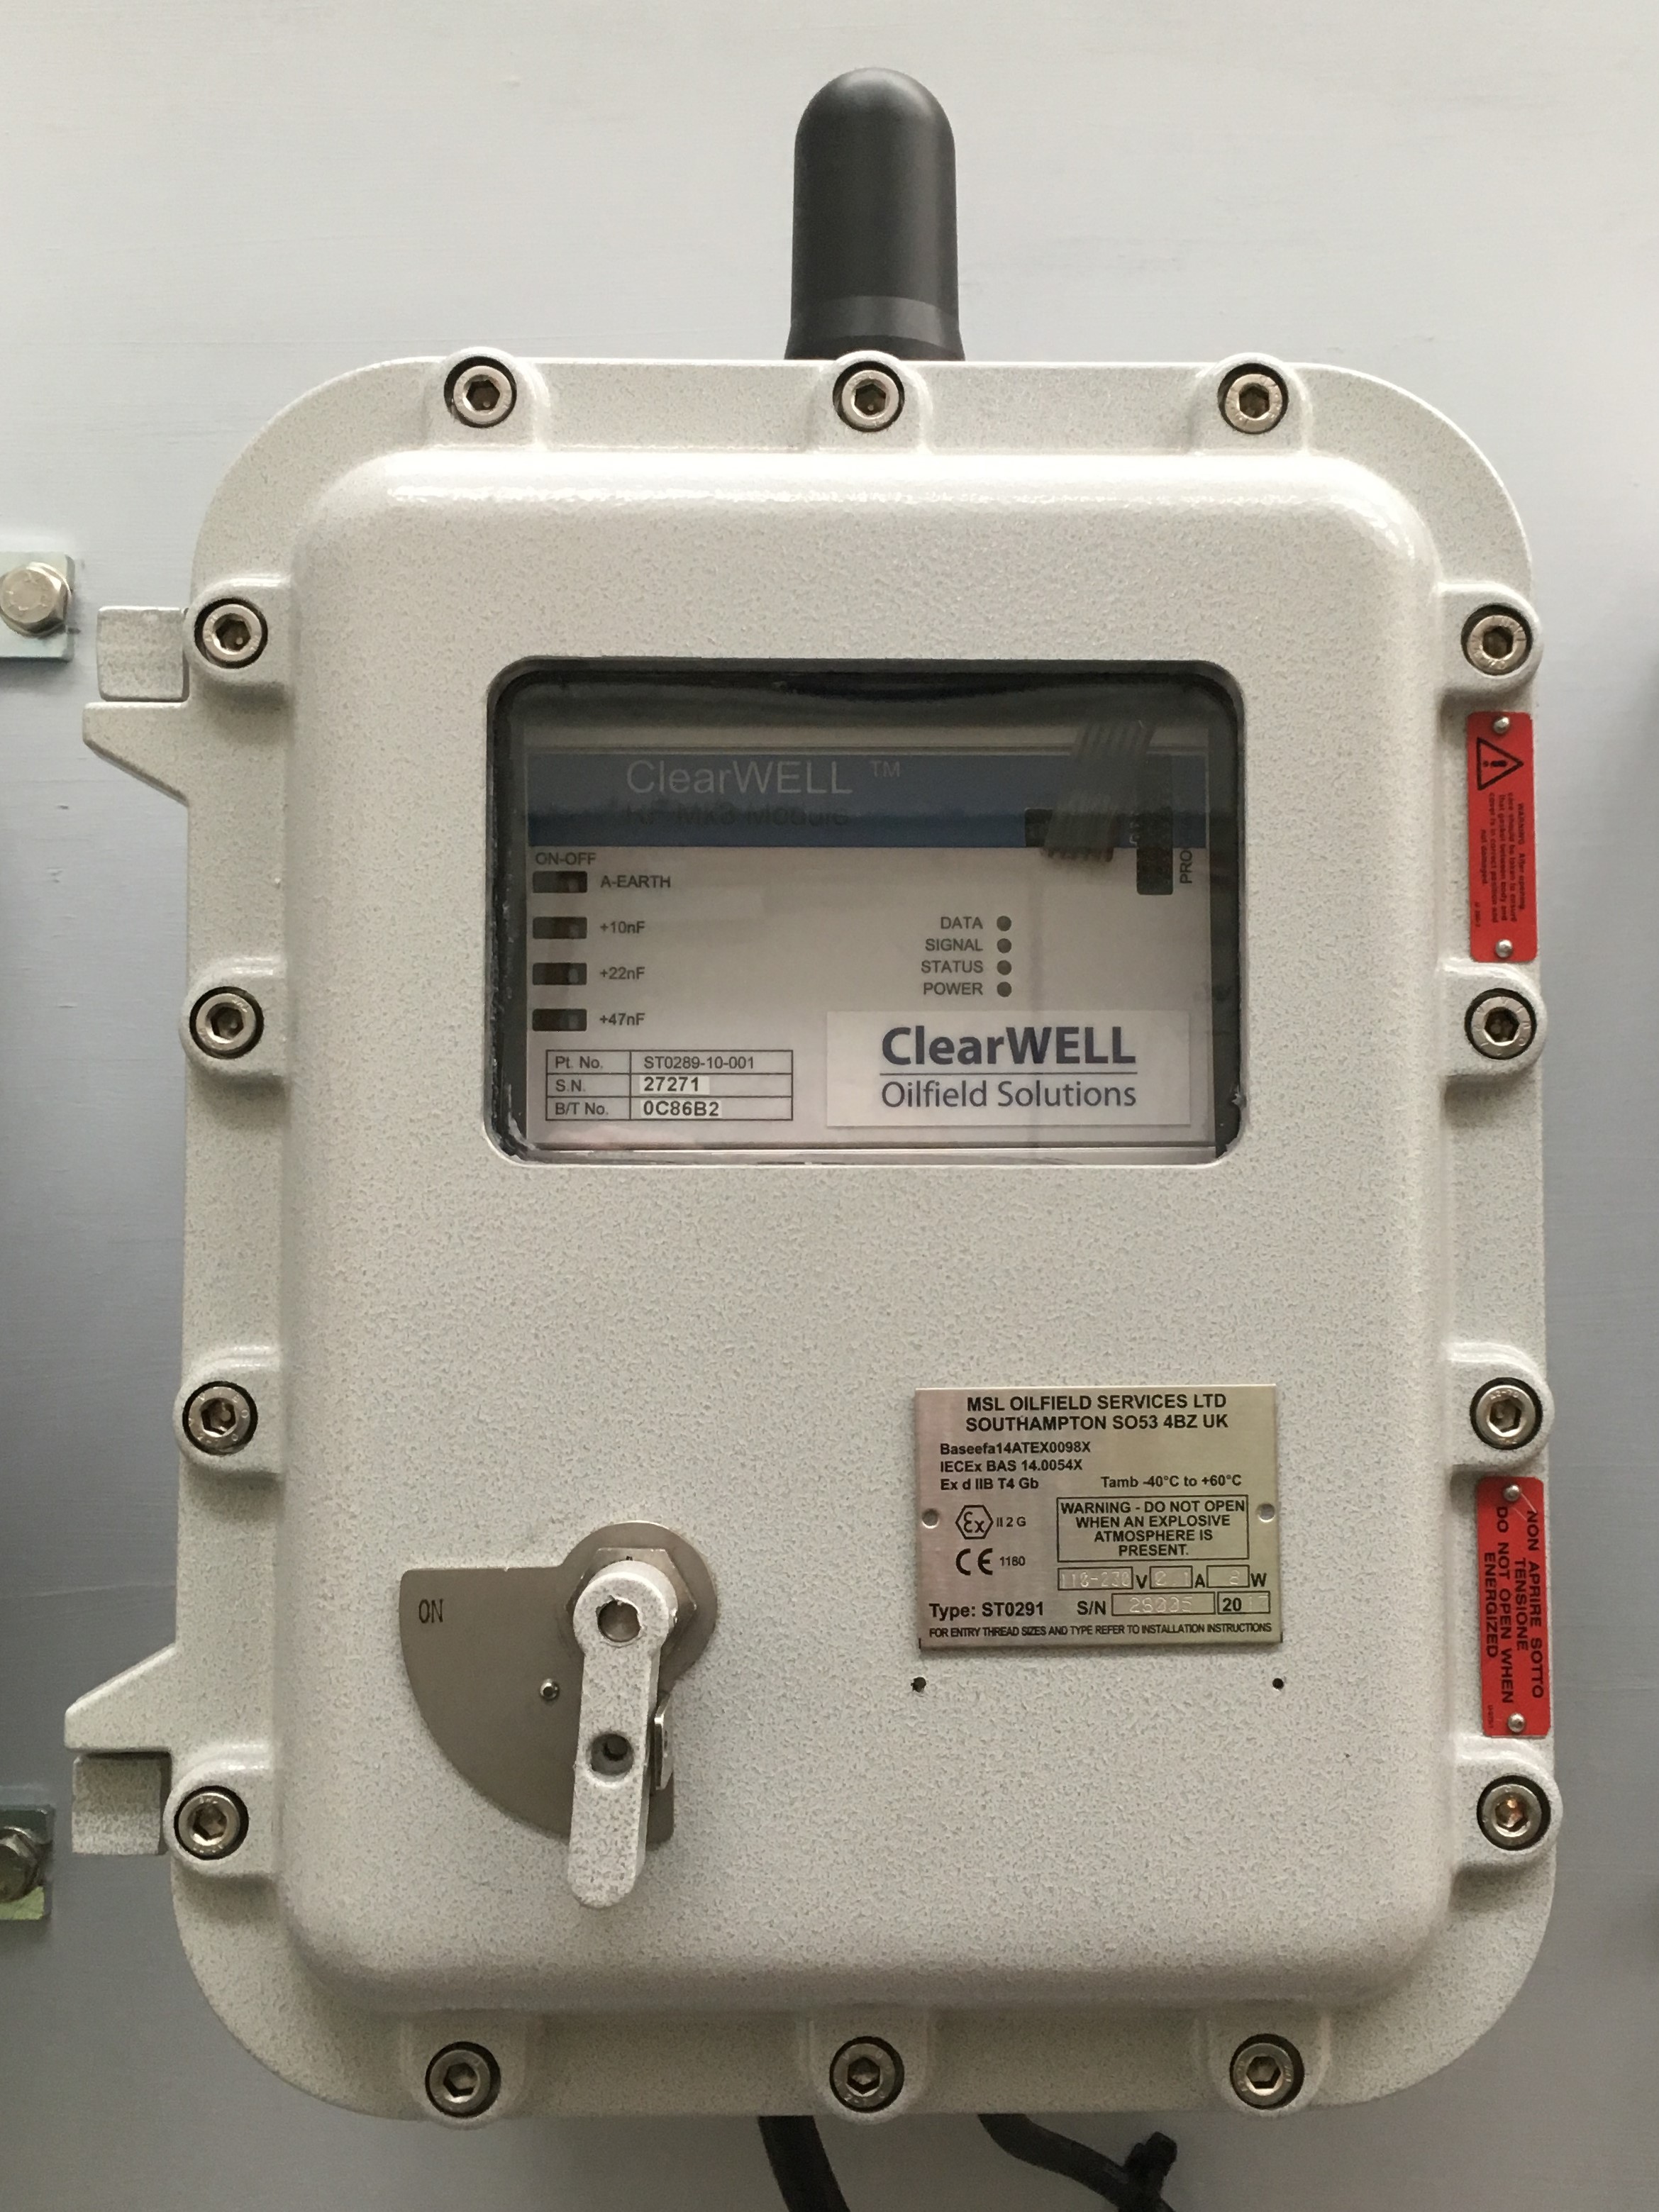 ClearWELL Oilfield Solutions